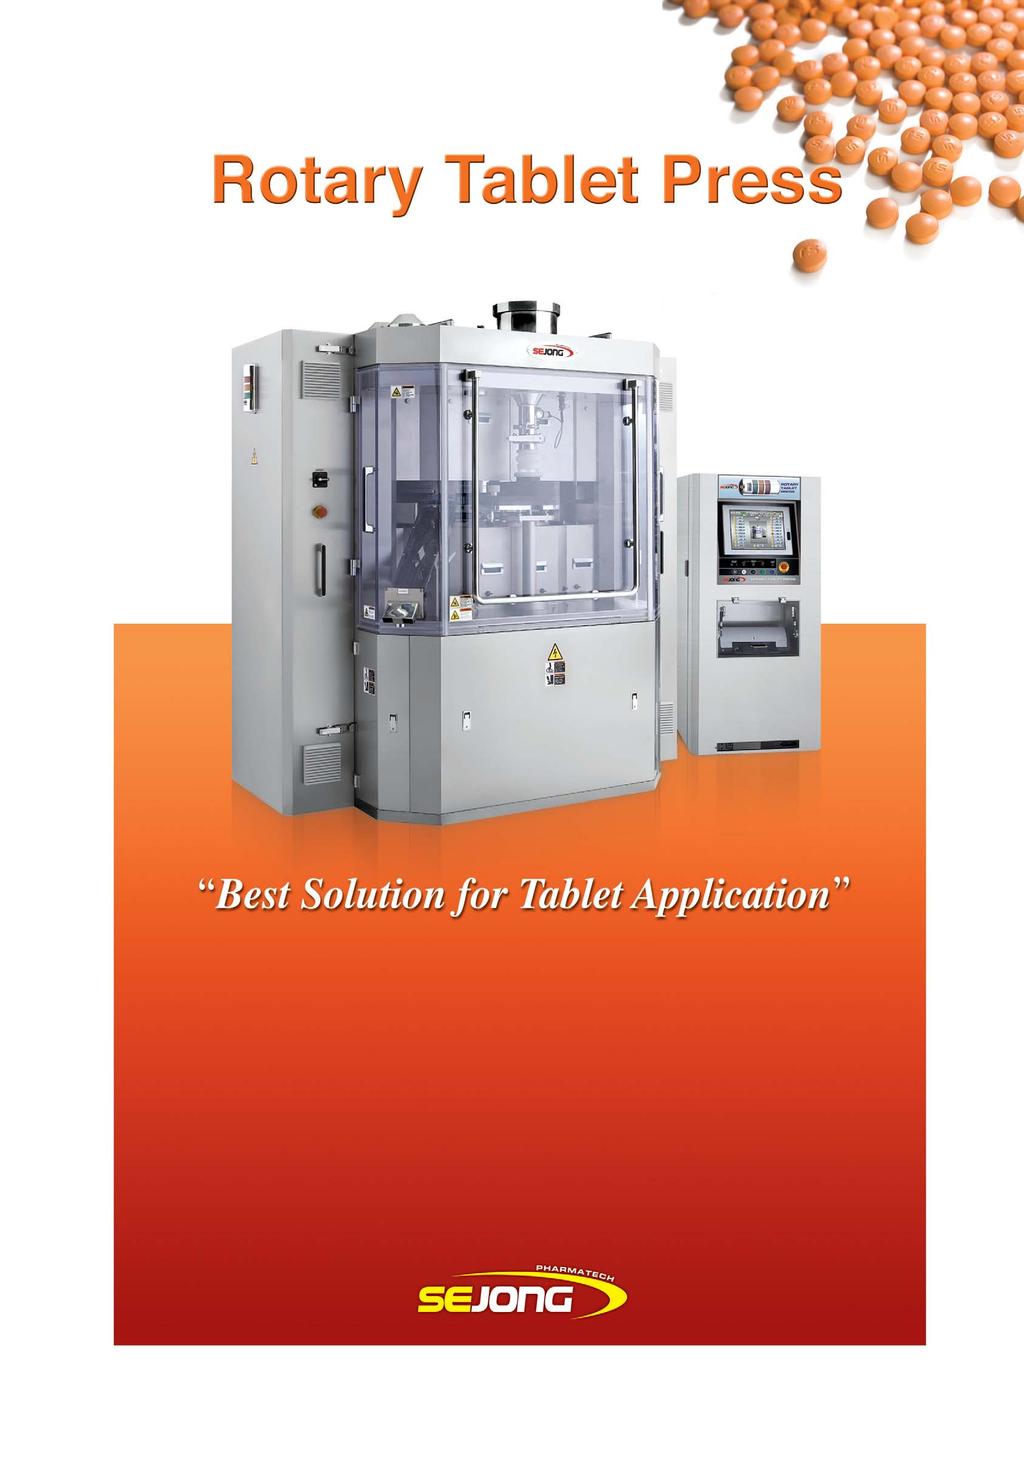 As a key product of Sejong Pharmatech, the rotary tablet press has a competitive edge in the global market.